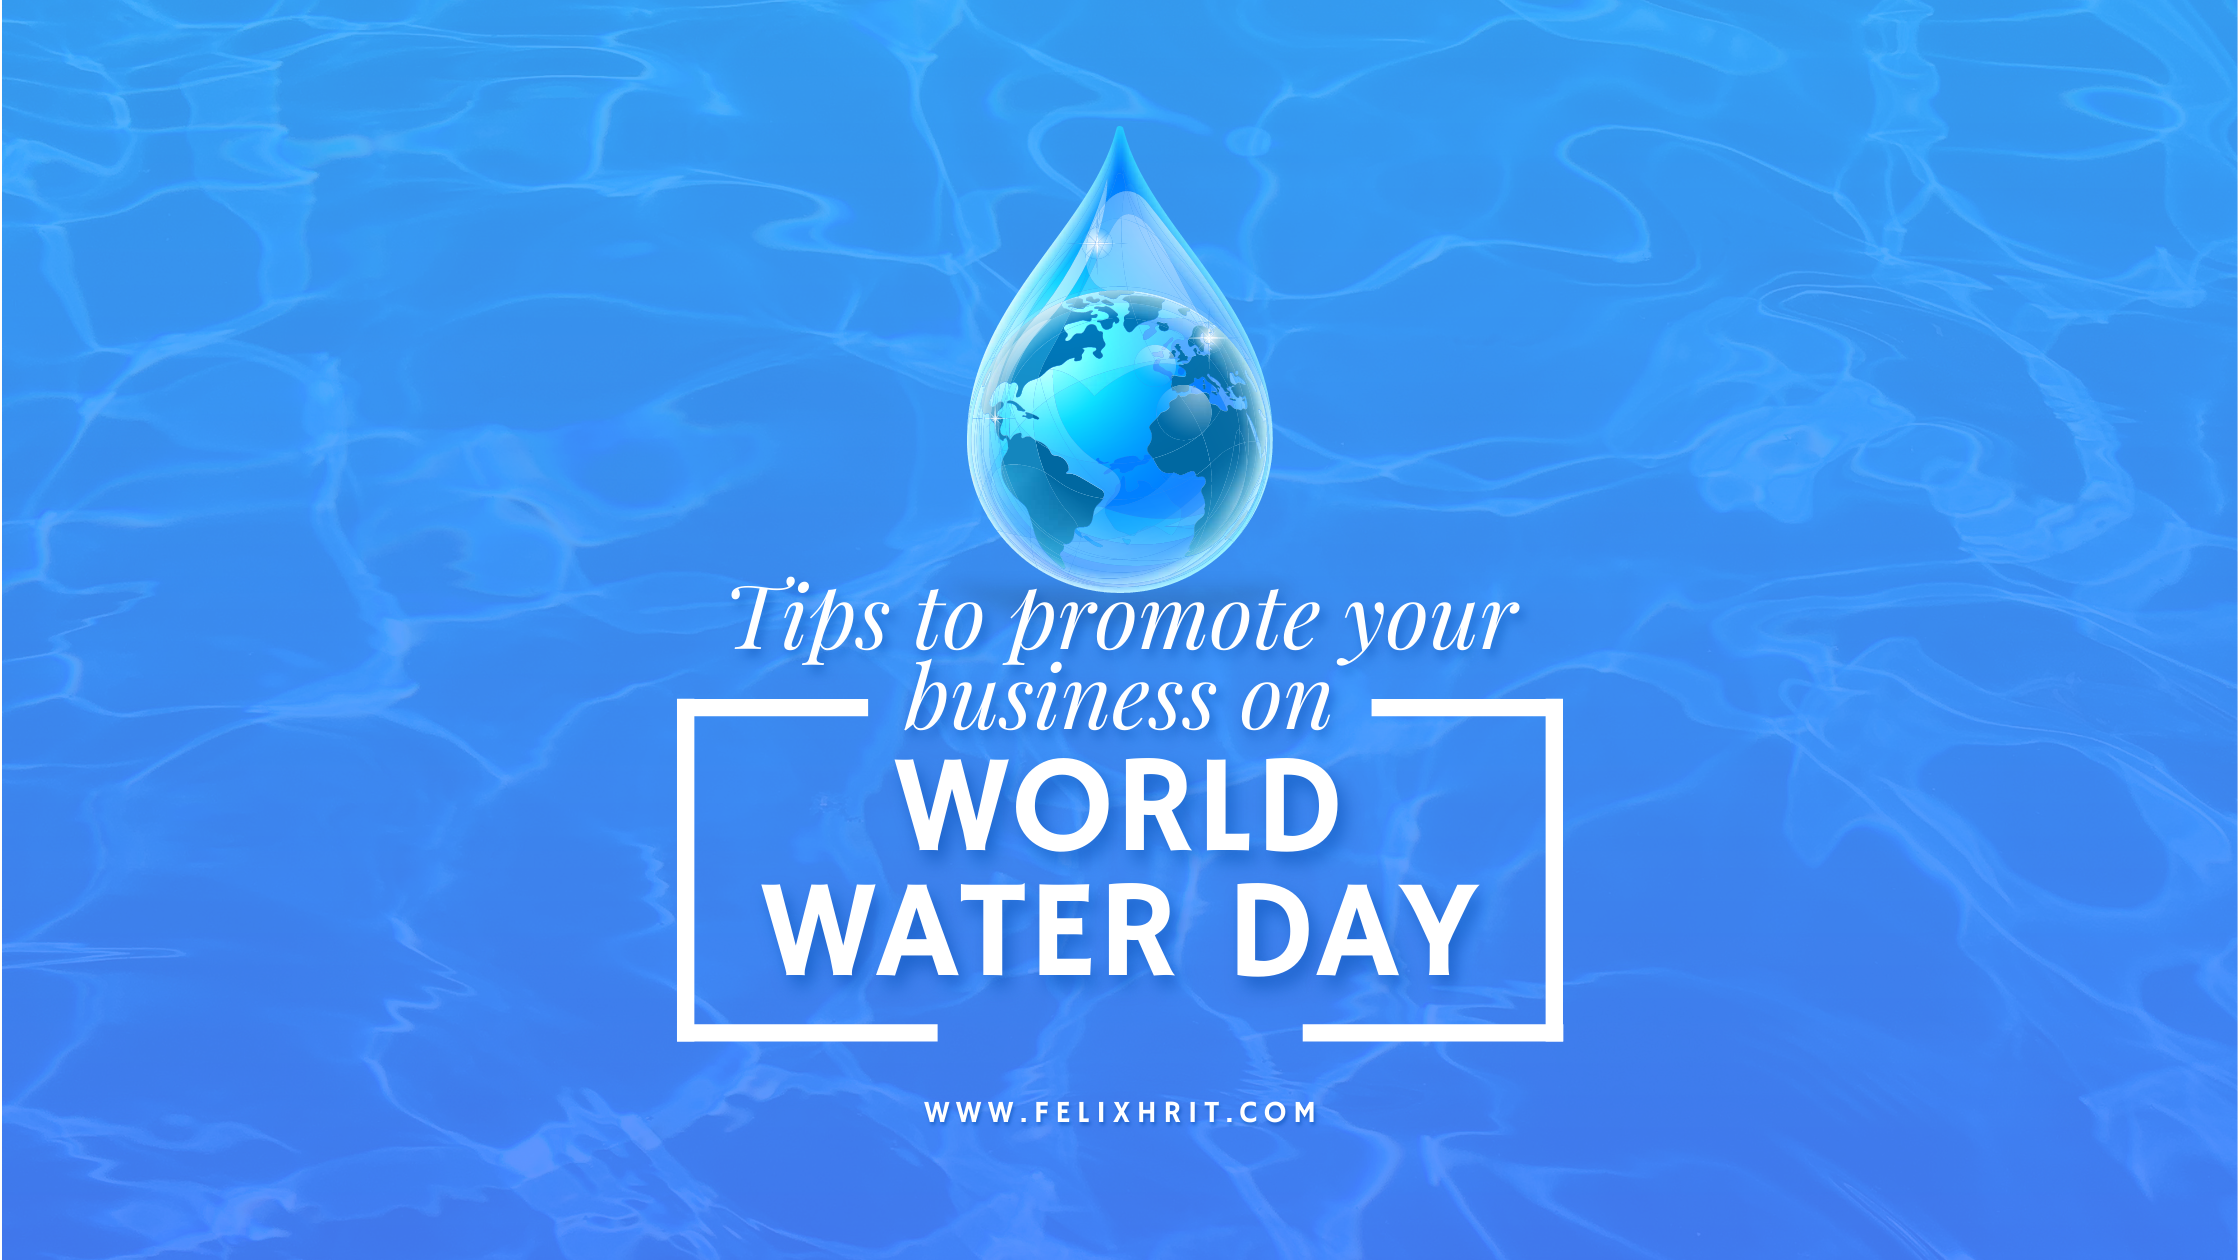 How to promote your business on world water day?